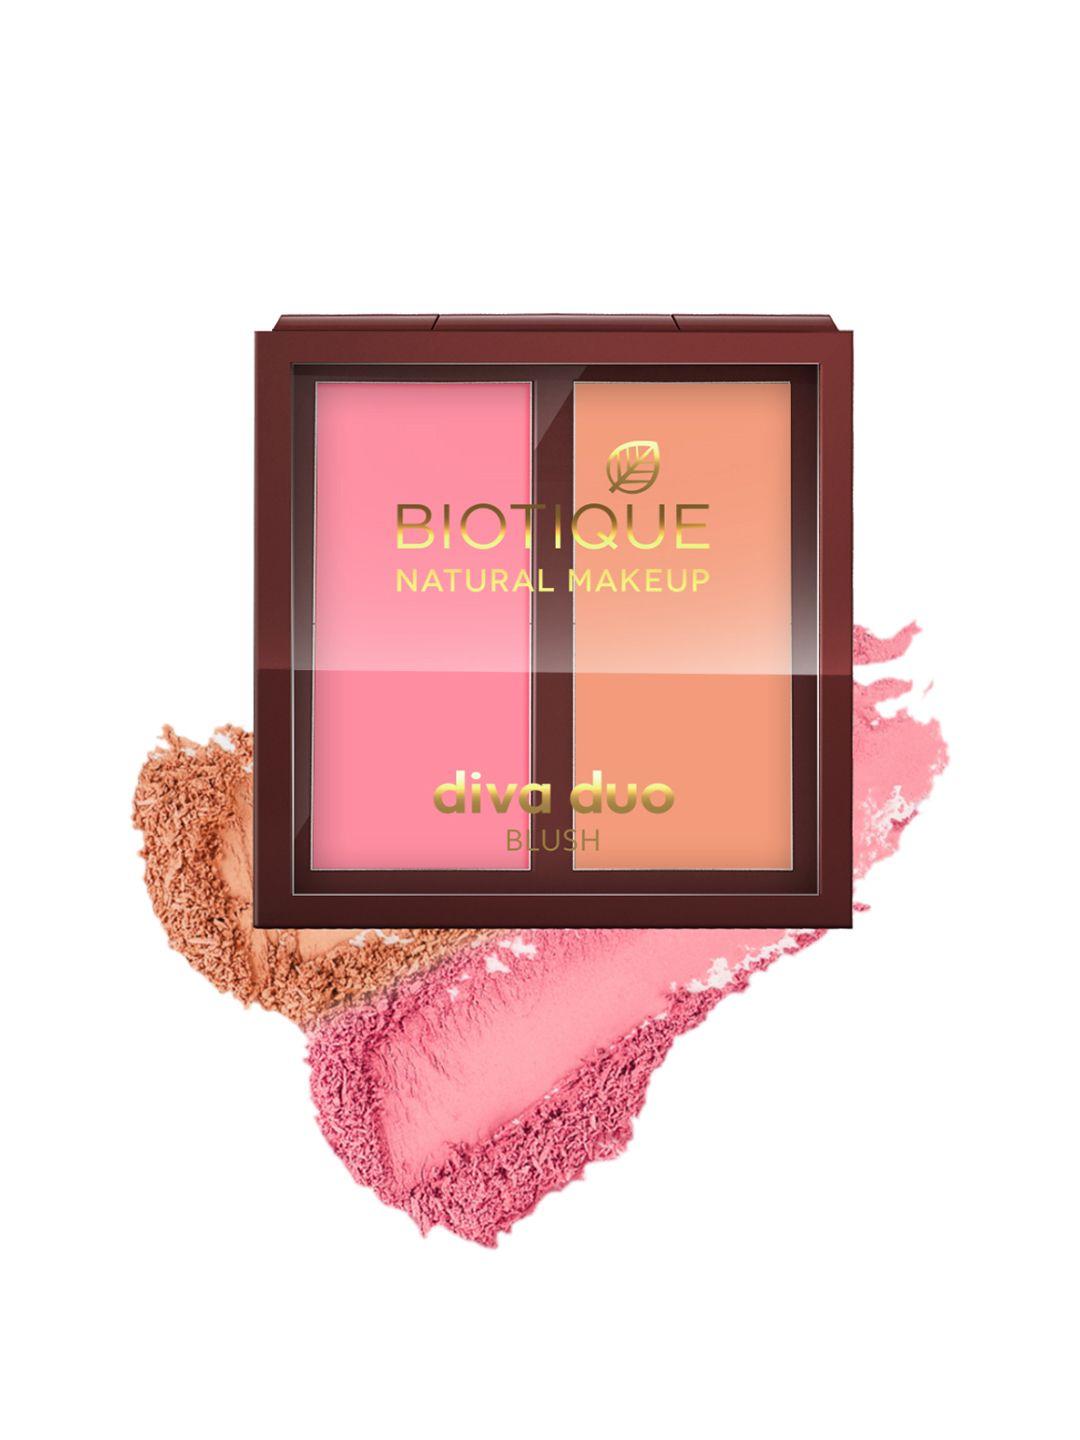 biotique natural makeup diva duo silky smooth blush - candy-n-coral